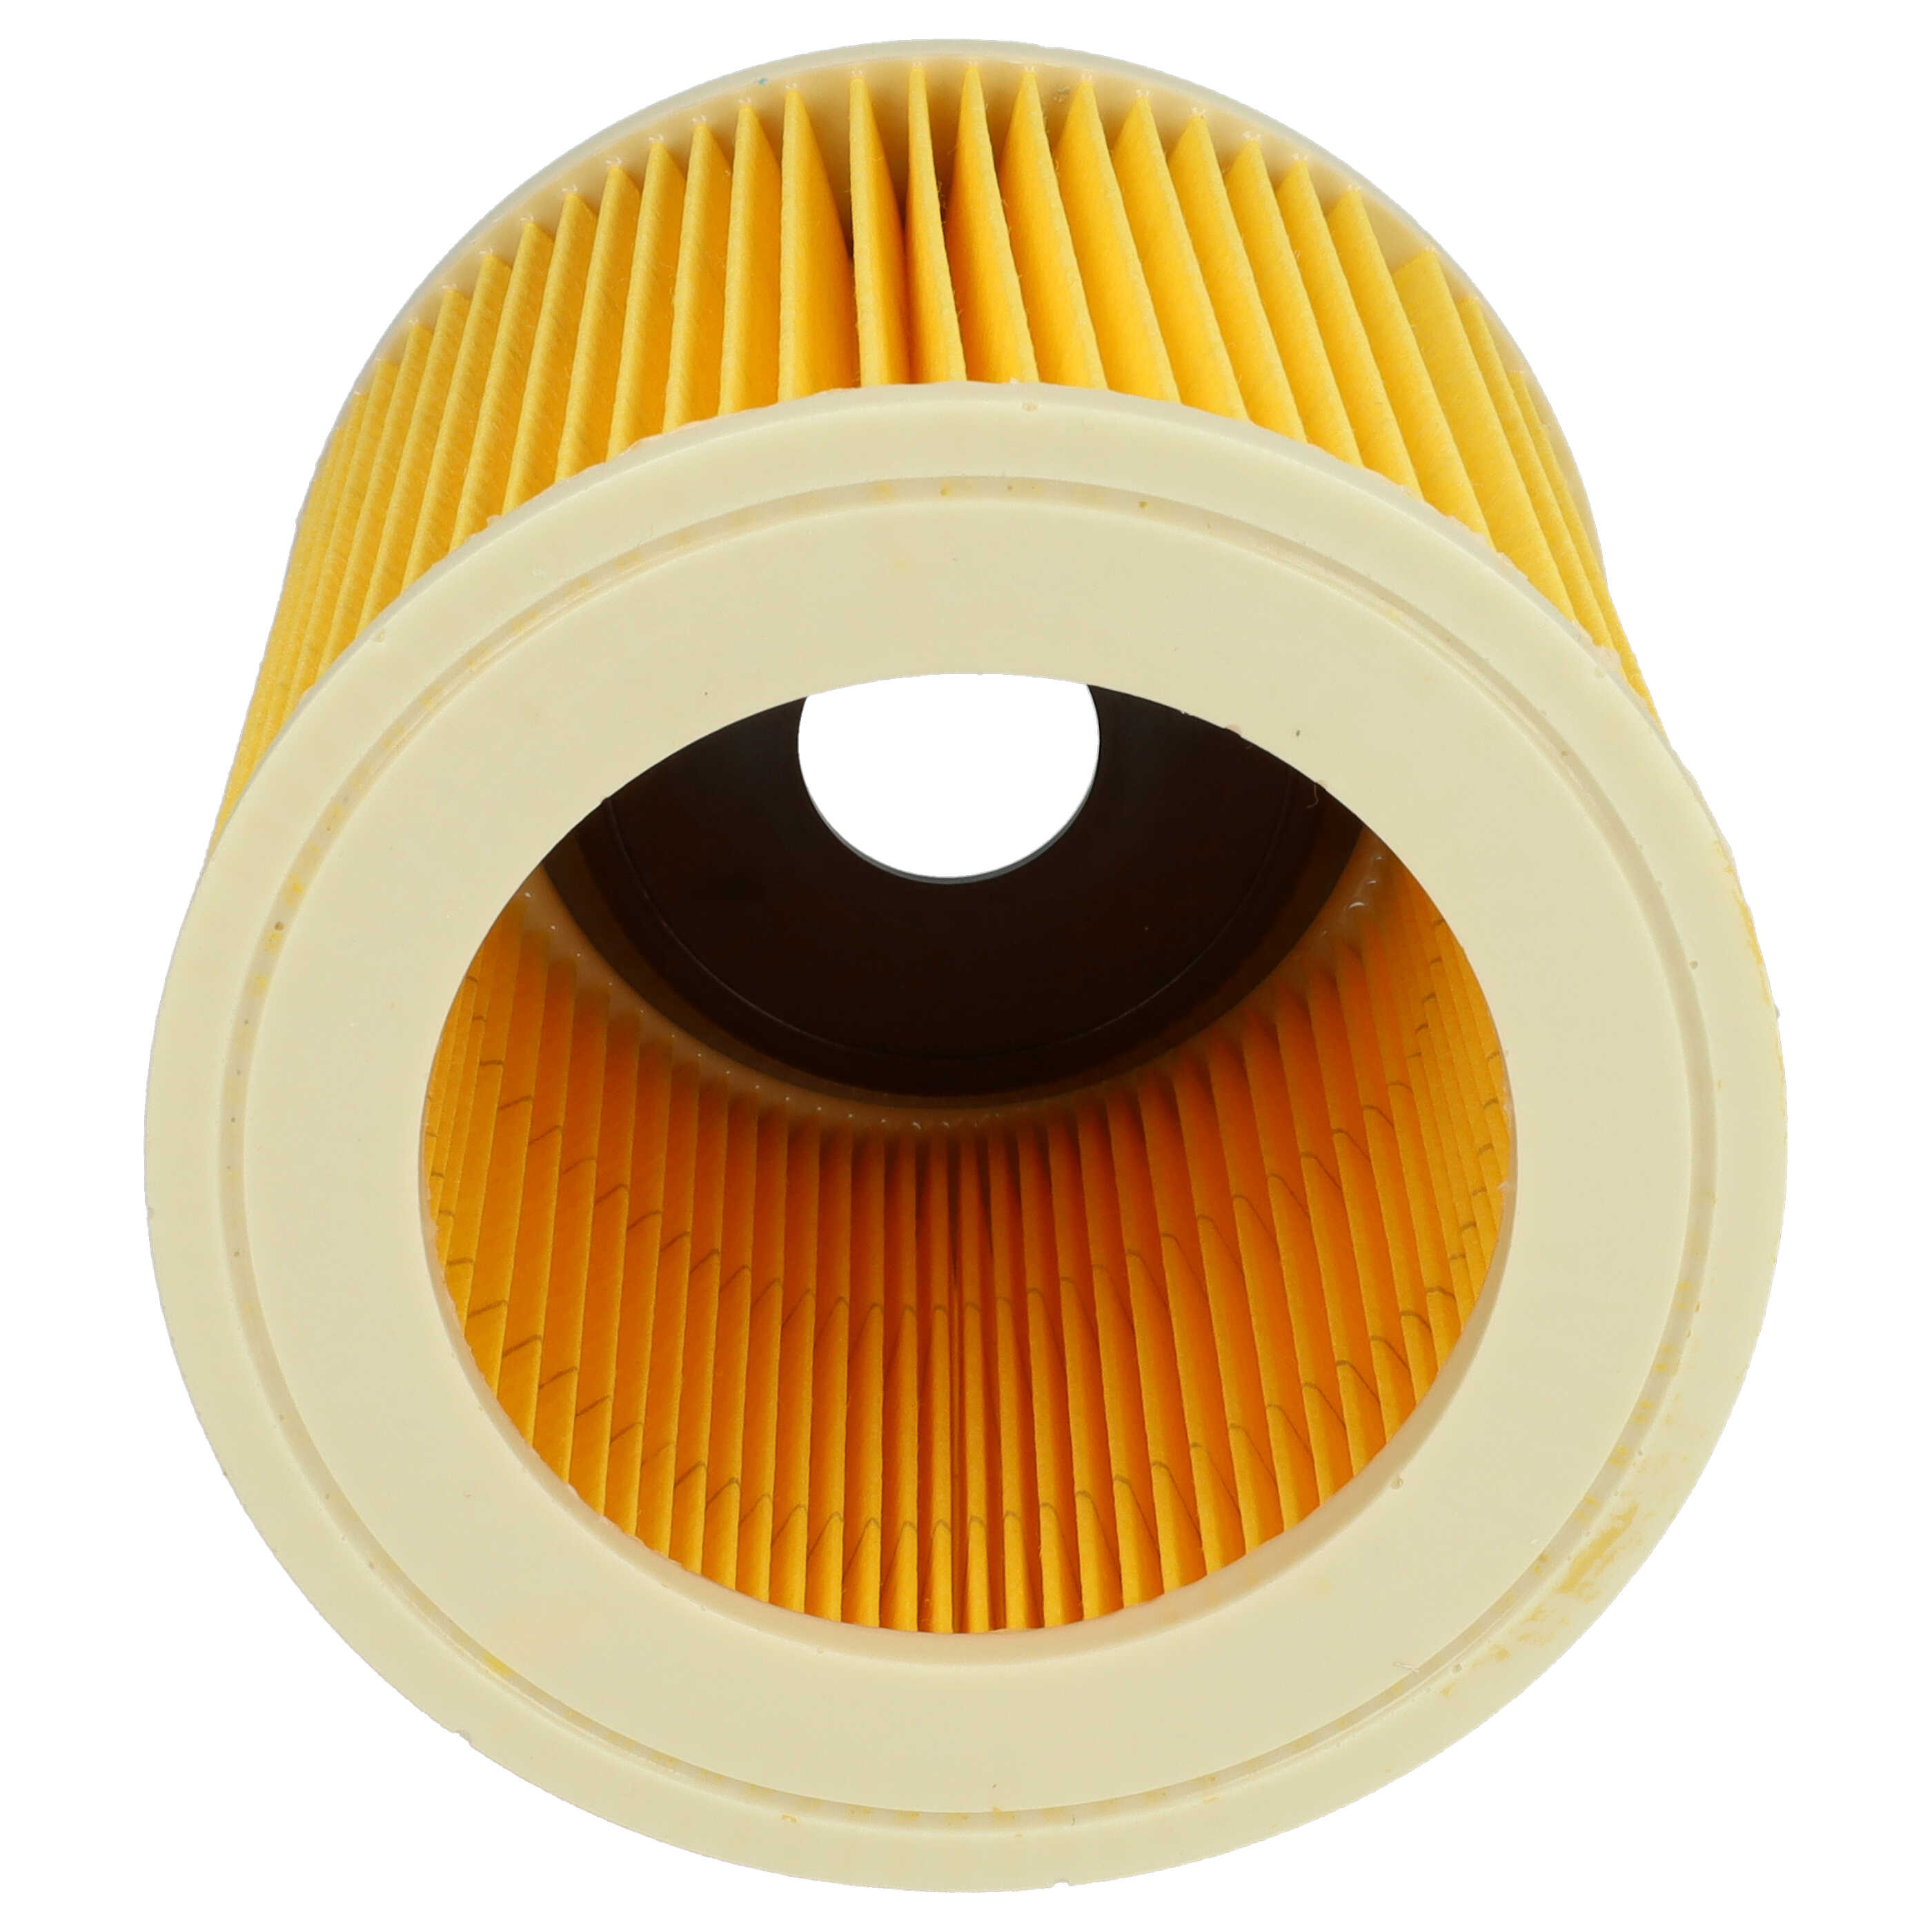 2x cartridge filter replaces Kärcher 2.863-303.0, 6.414-552.0, 6.414-547.0 for BaierVacuum Cleaner, yellow